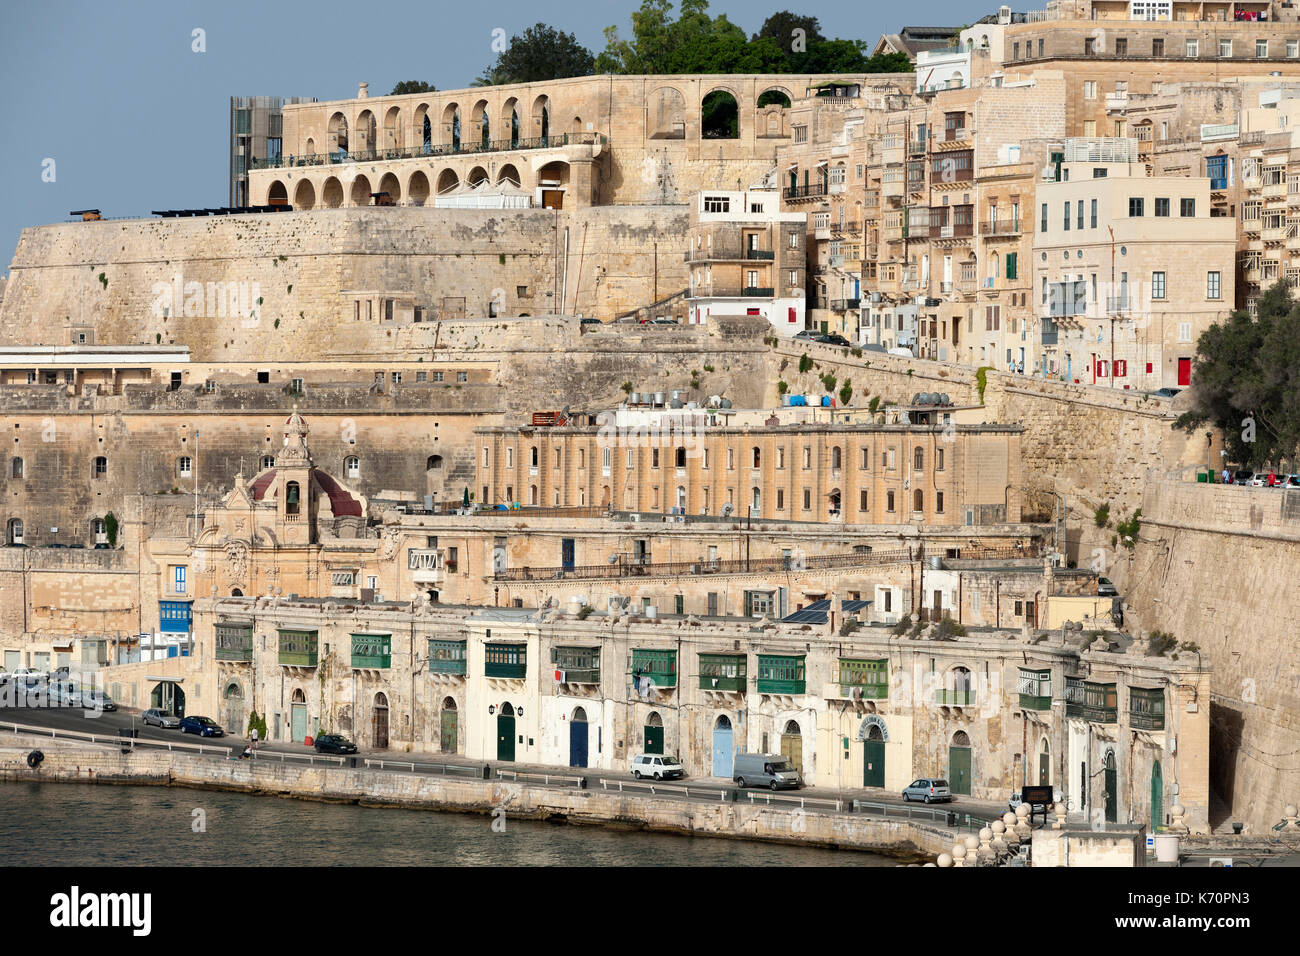 The old town of Valletta, the capital of Malta. Stock Photo